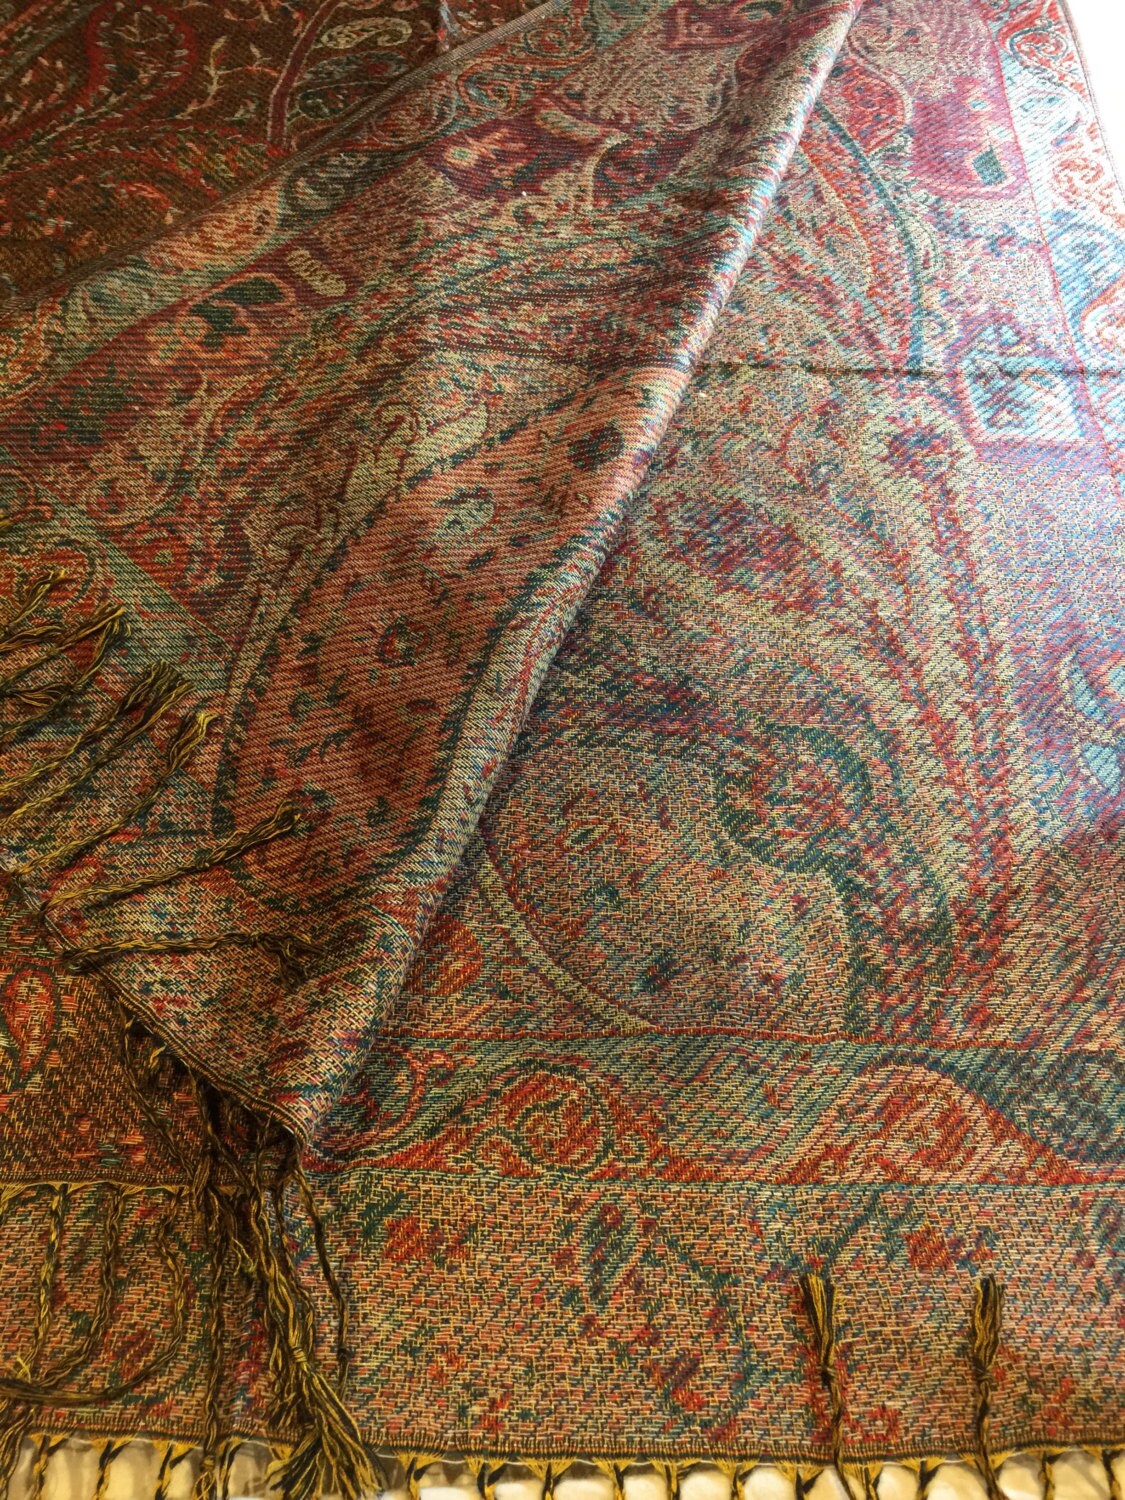 Vintage Green and Beige Paisley Brocade Pashmina Scarf Wrap Shawl